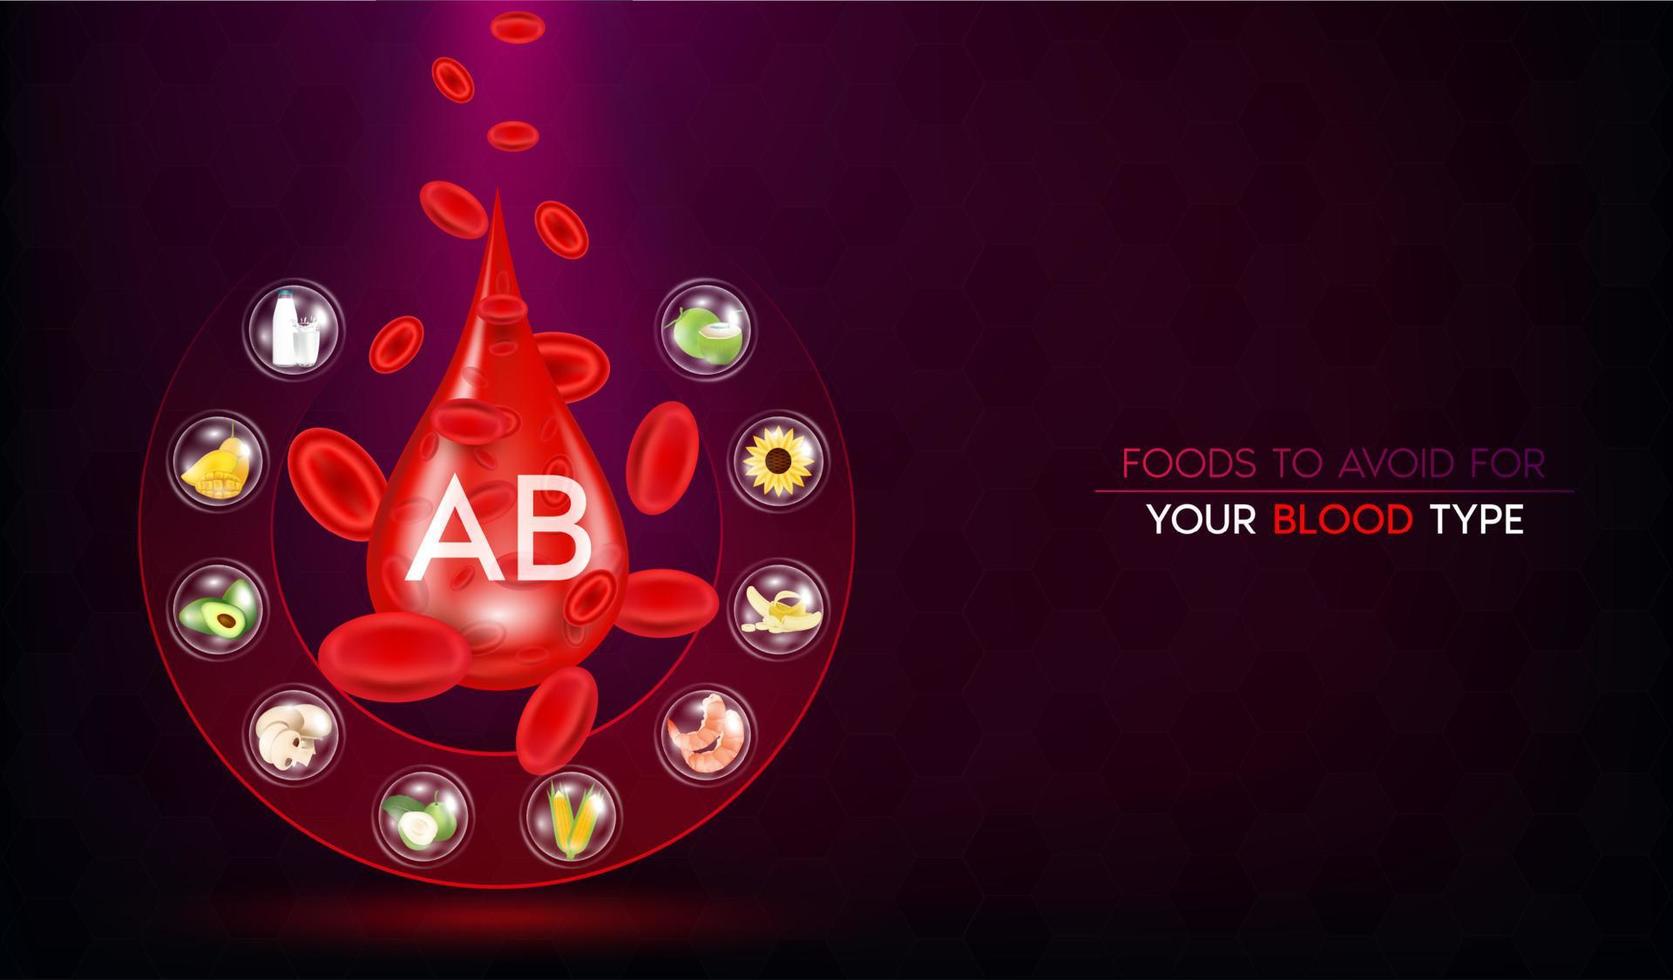 Blood group AB, Foods vegetable fruit  to avoid for your blood type. Medical nutriment concept. Realistic with 3D vector illustration. On a dark red background.